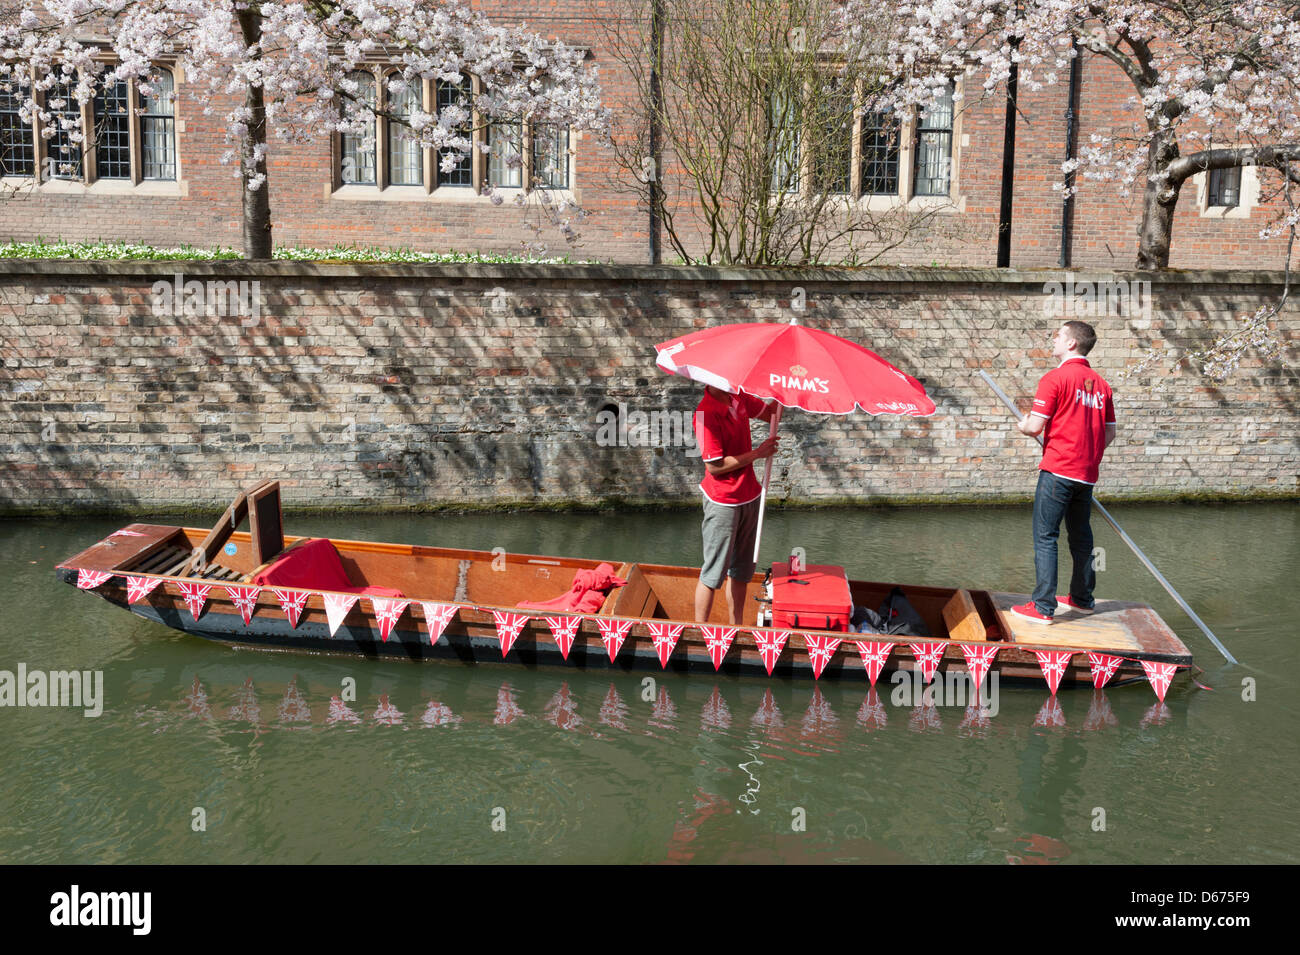 Cambridge, UK. 14 April 2013. A colourfully decorated punt sells drinks and snacks on the River Cam. The river was busy with tourists enjoying the warmest day of the year so far with temperatures hitting 20 degrees centigrade. Spring weather finally arrived after weeks of cold wet weather. Julian Eales/Alamy Live News Stock Photo